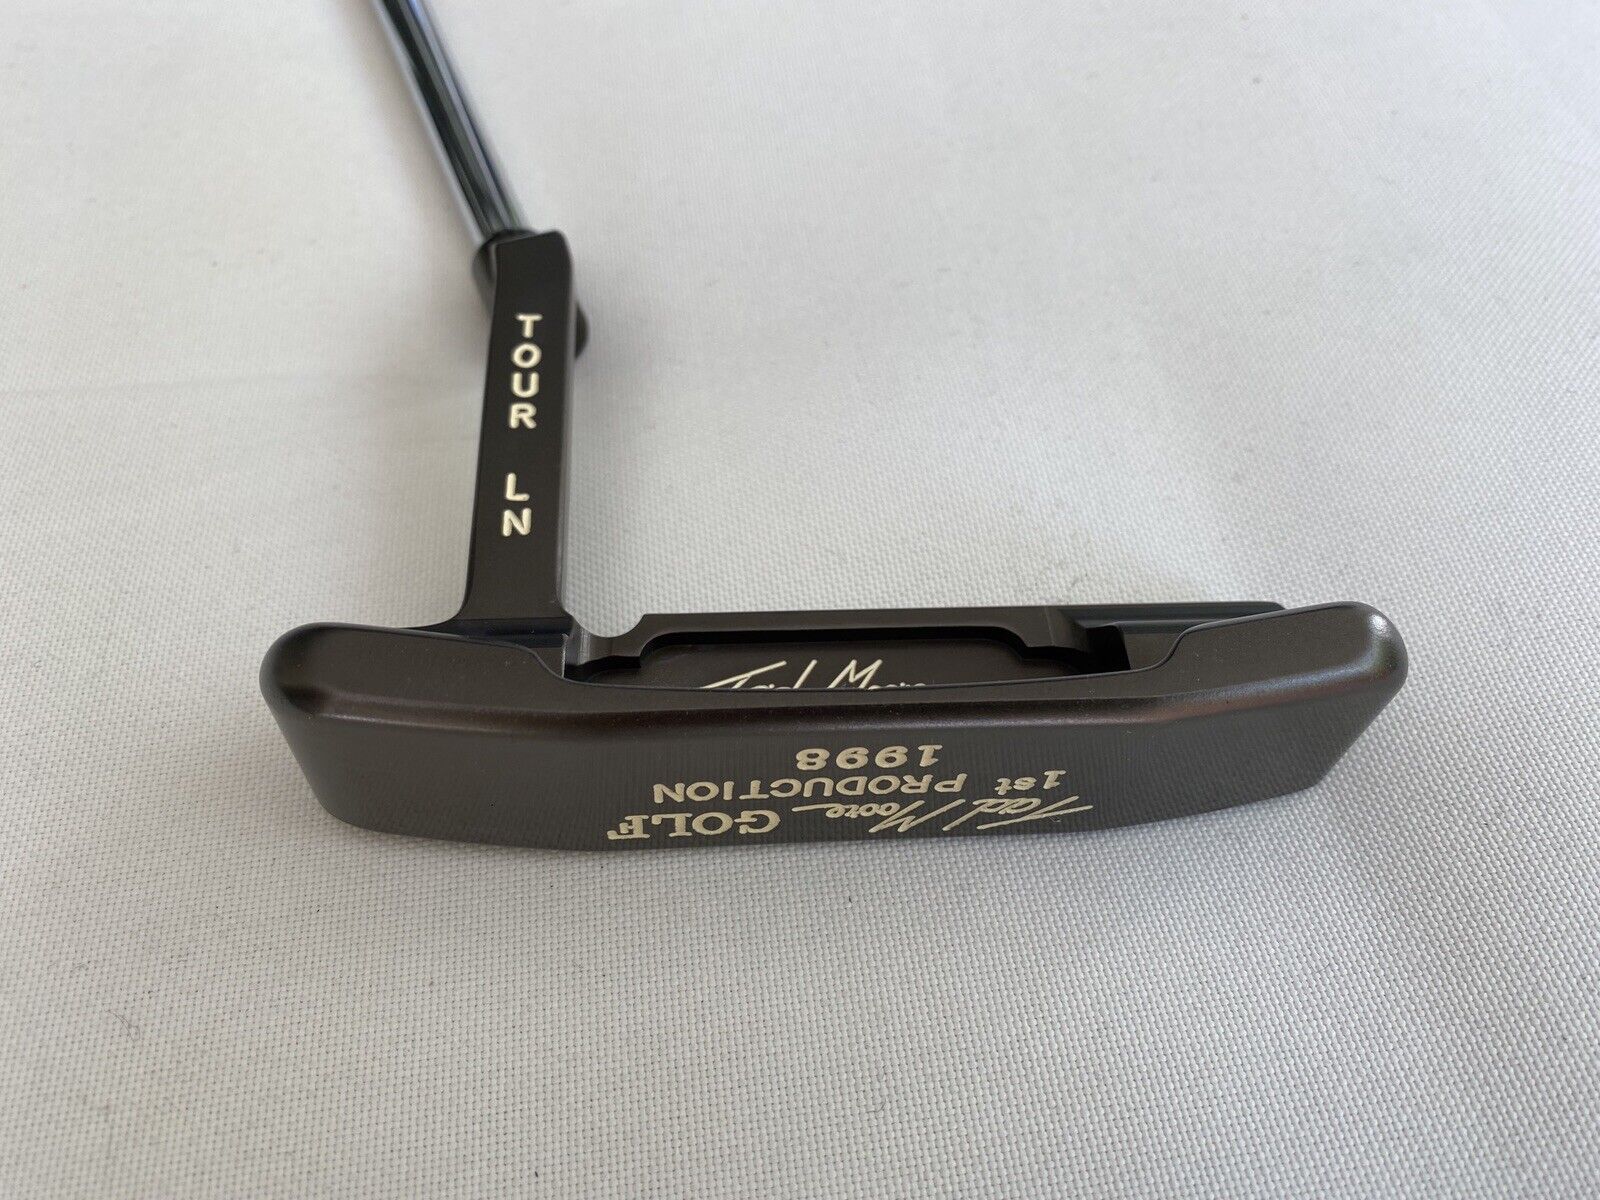 NEW -Tad Moore 1st Production 1998 Tour LN Long neck 35” Or 36” Putter RH